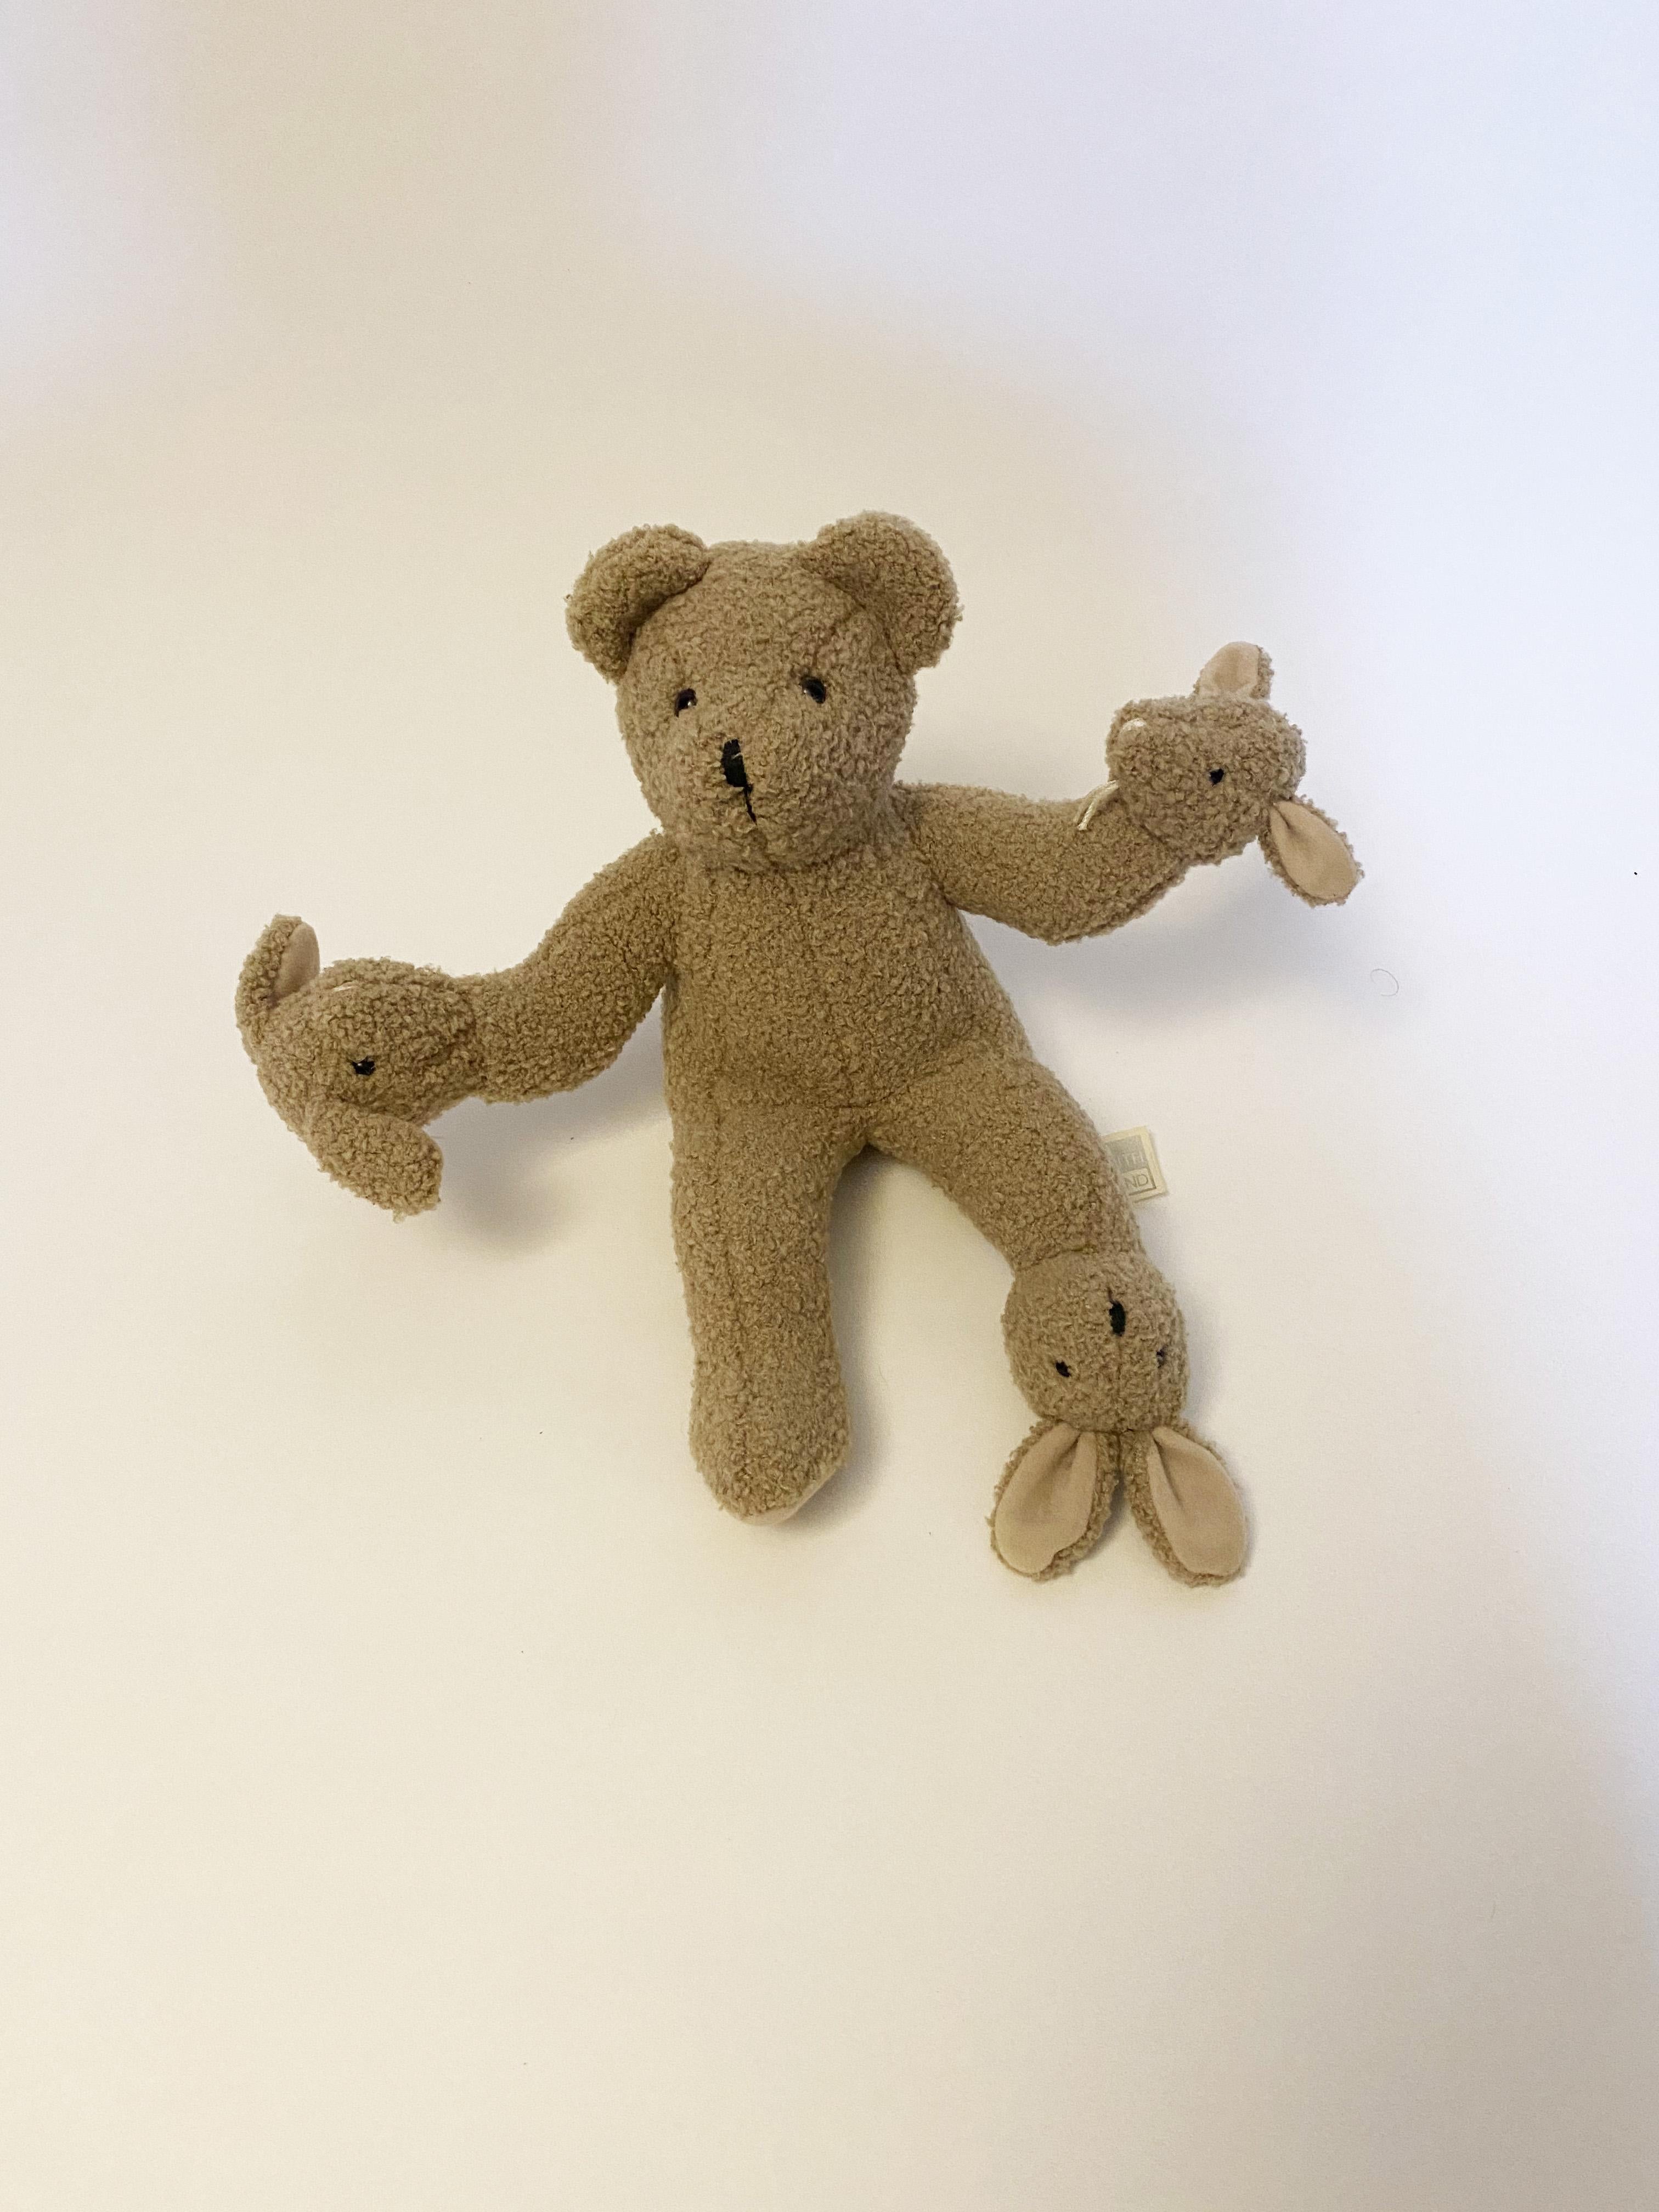 Fabric Teddy Bear Band by Philippe Starck for Moulin Roty, 1998